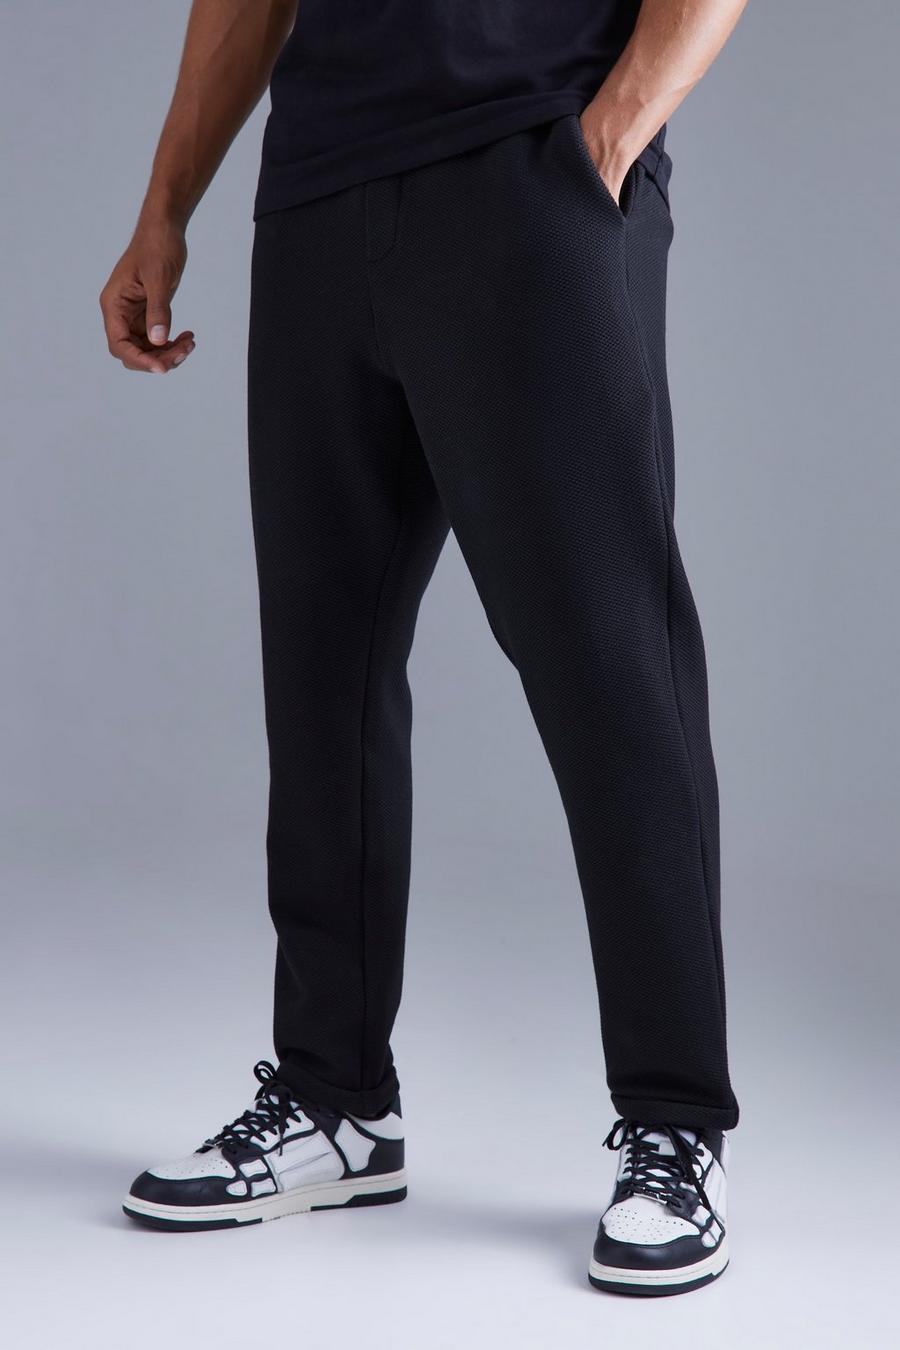 Black Elasticated Tapered Textured Smart Trousers